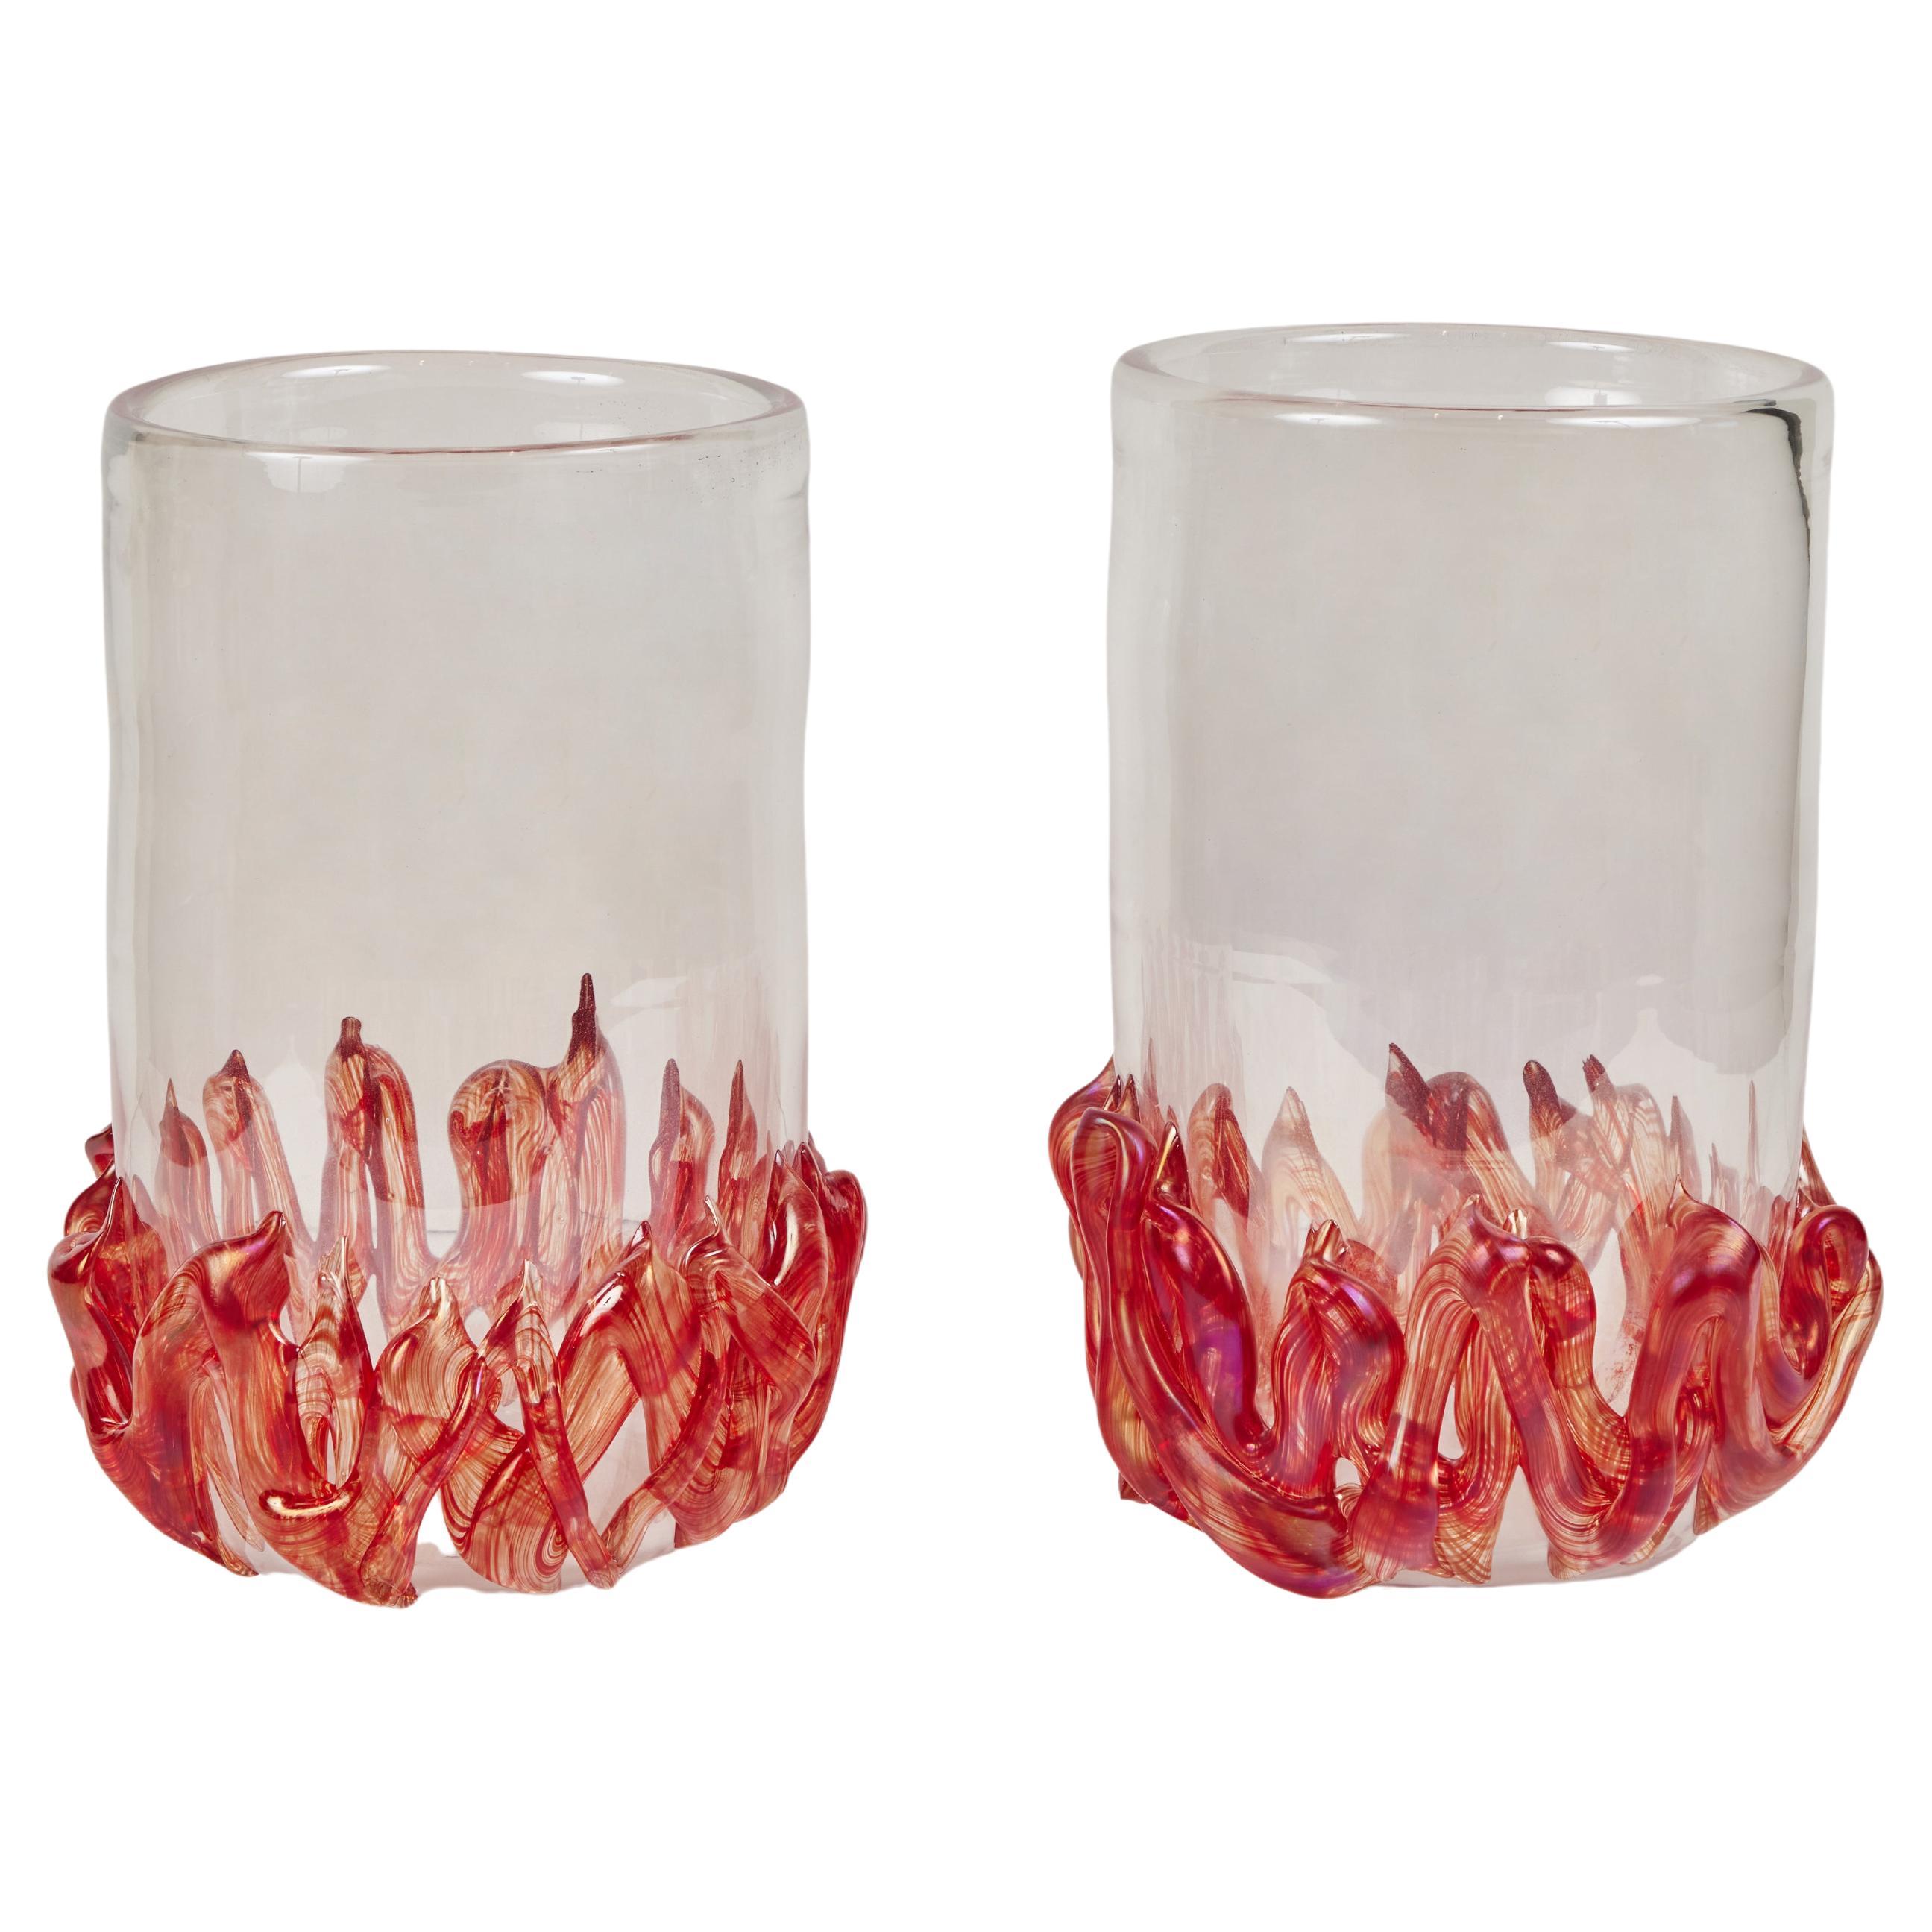 Signed Pair of Murano Glass Vases with Flame Detail For Sale